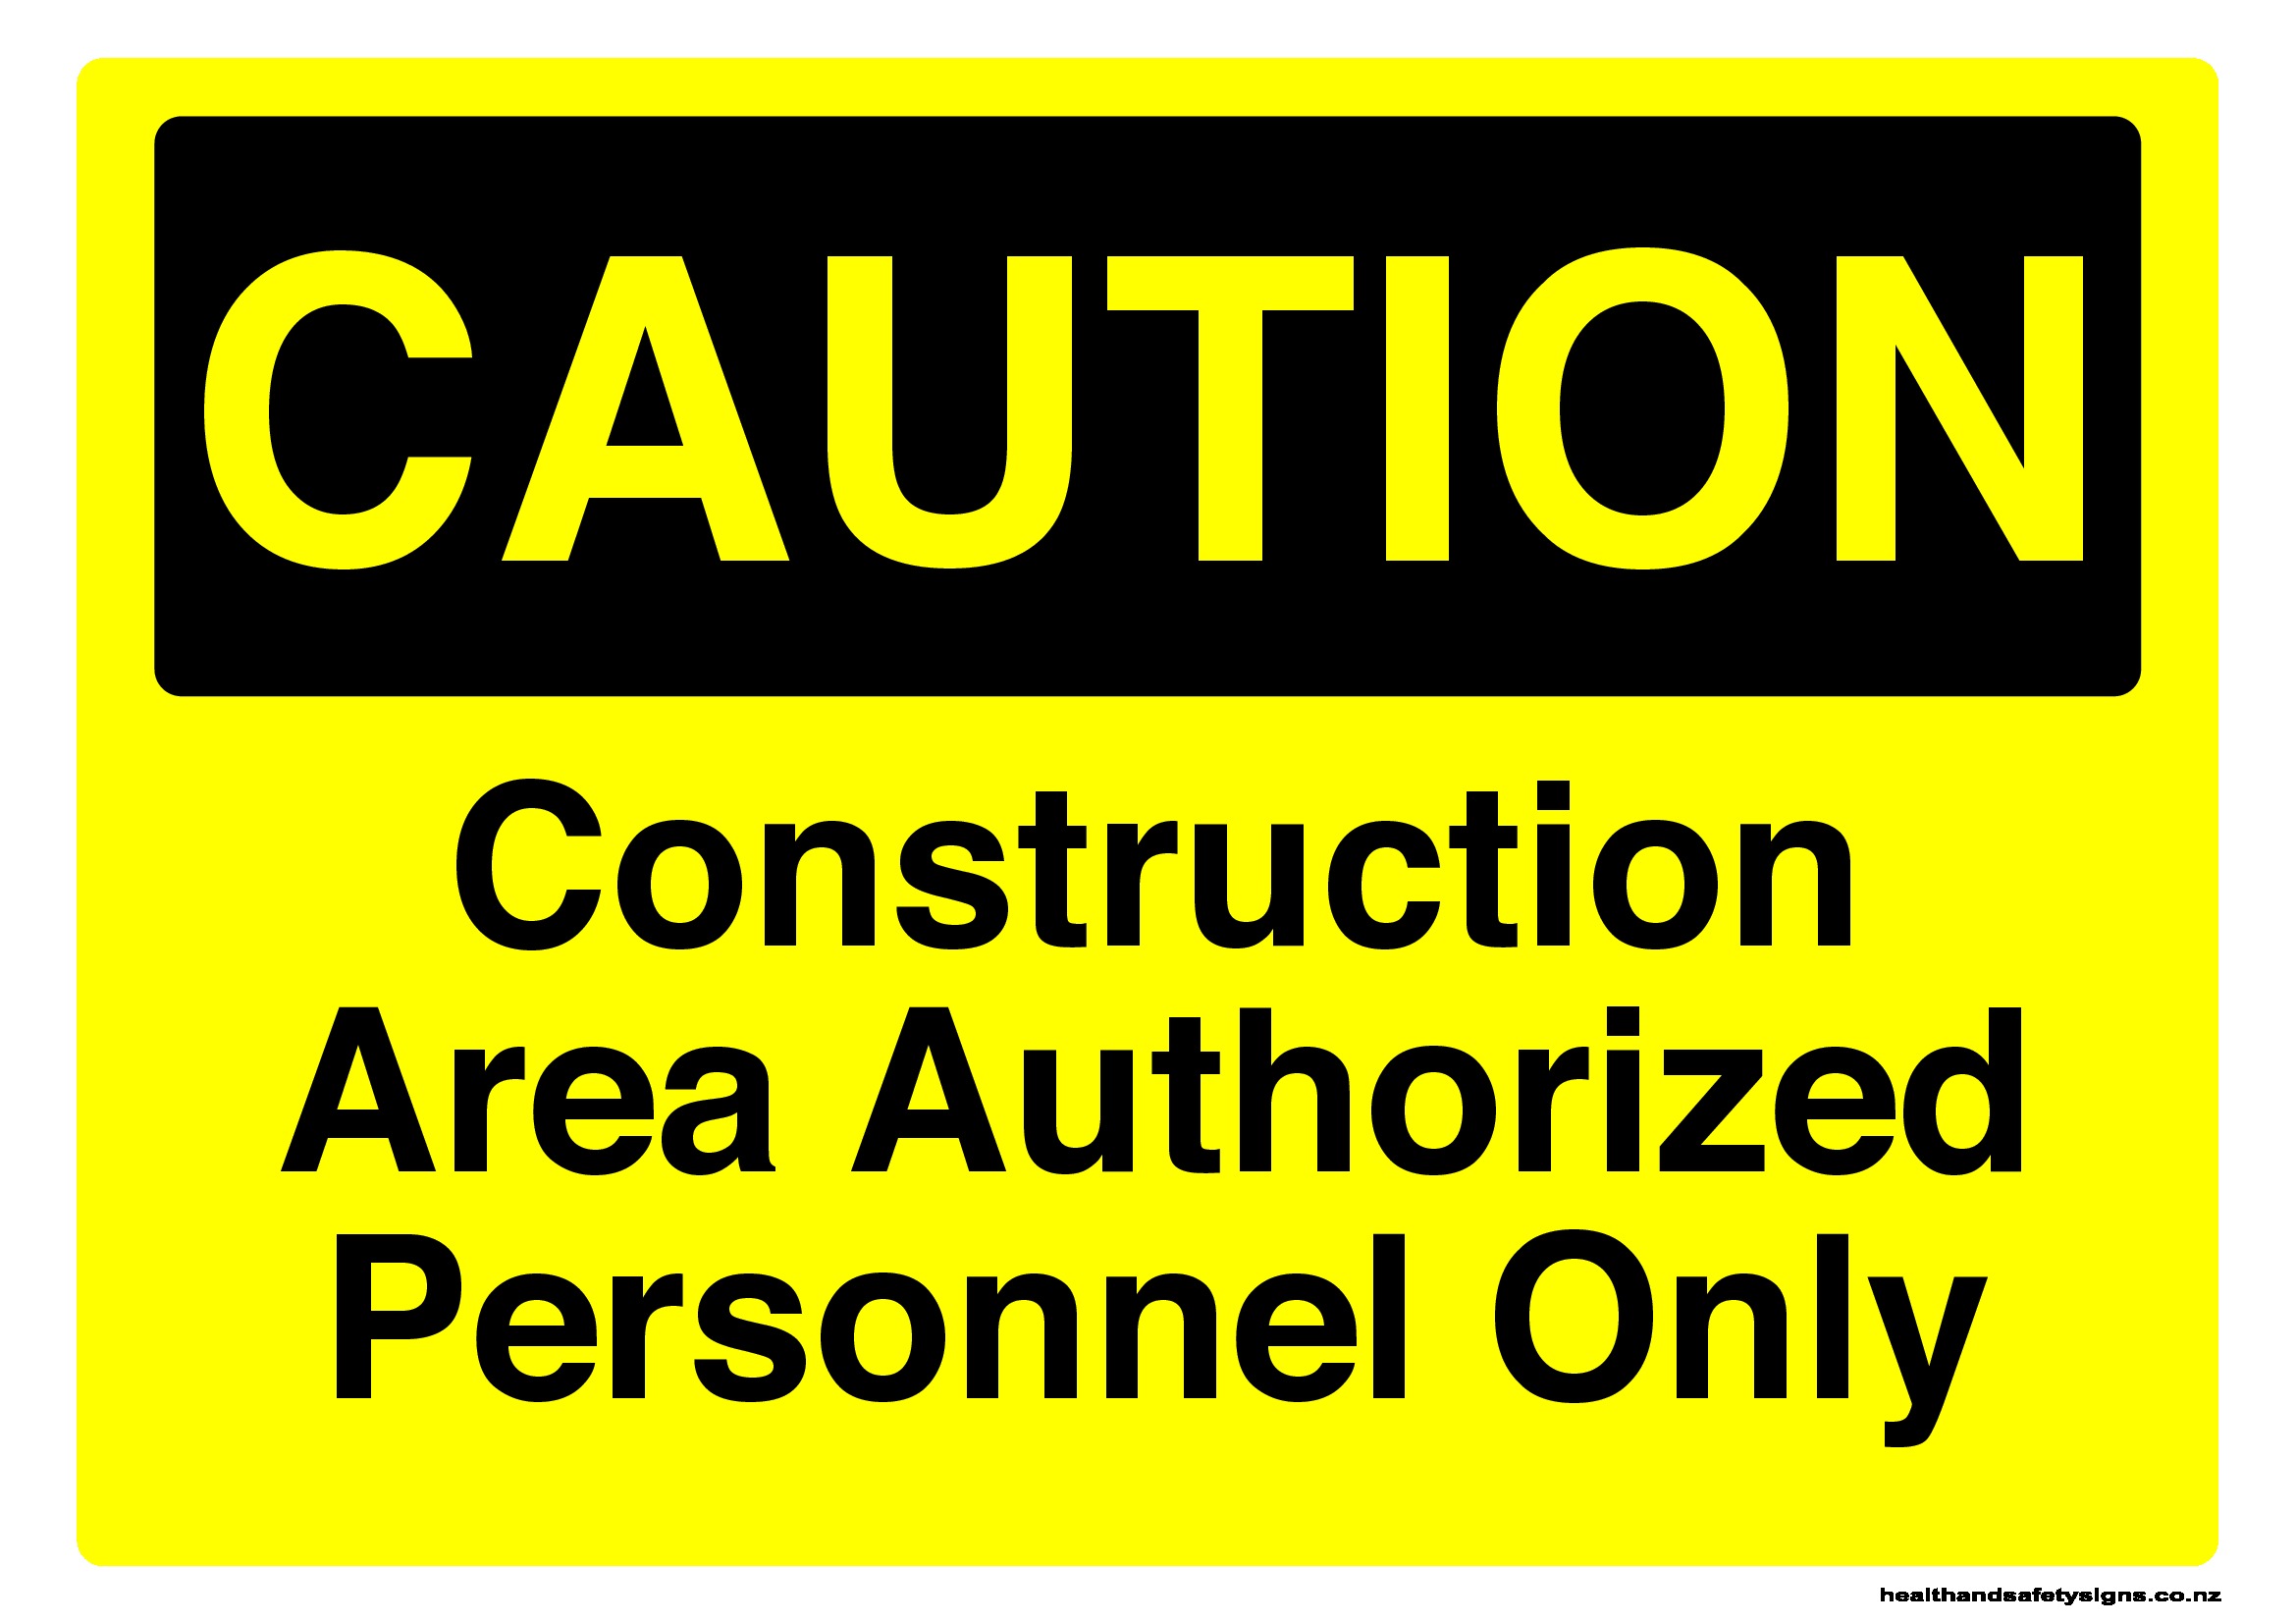 construction-area-authorized-personnel-only-caution-sign-health-and-safety-signs